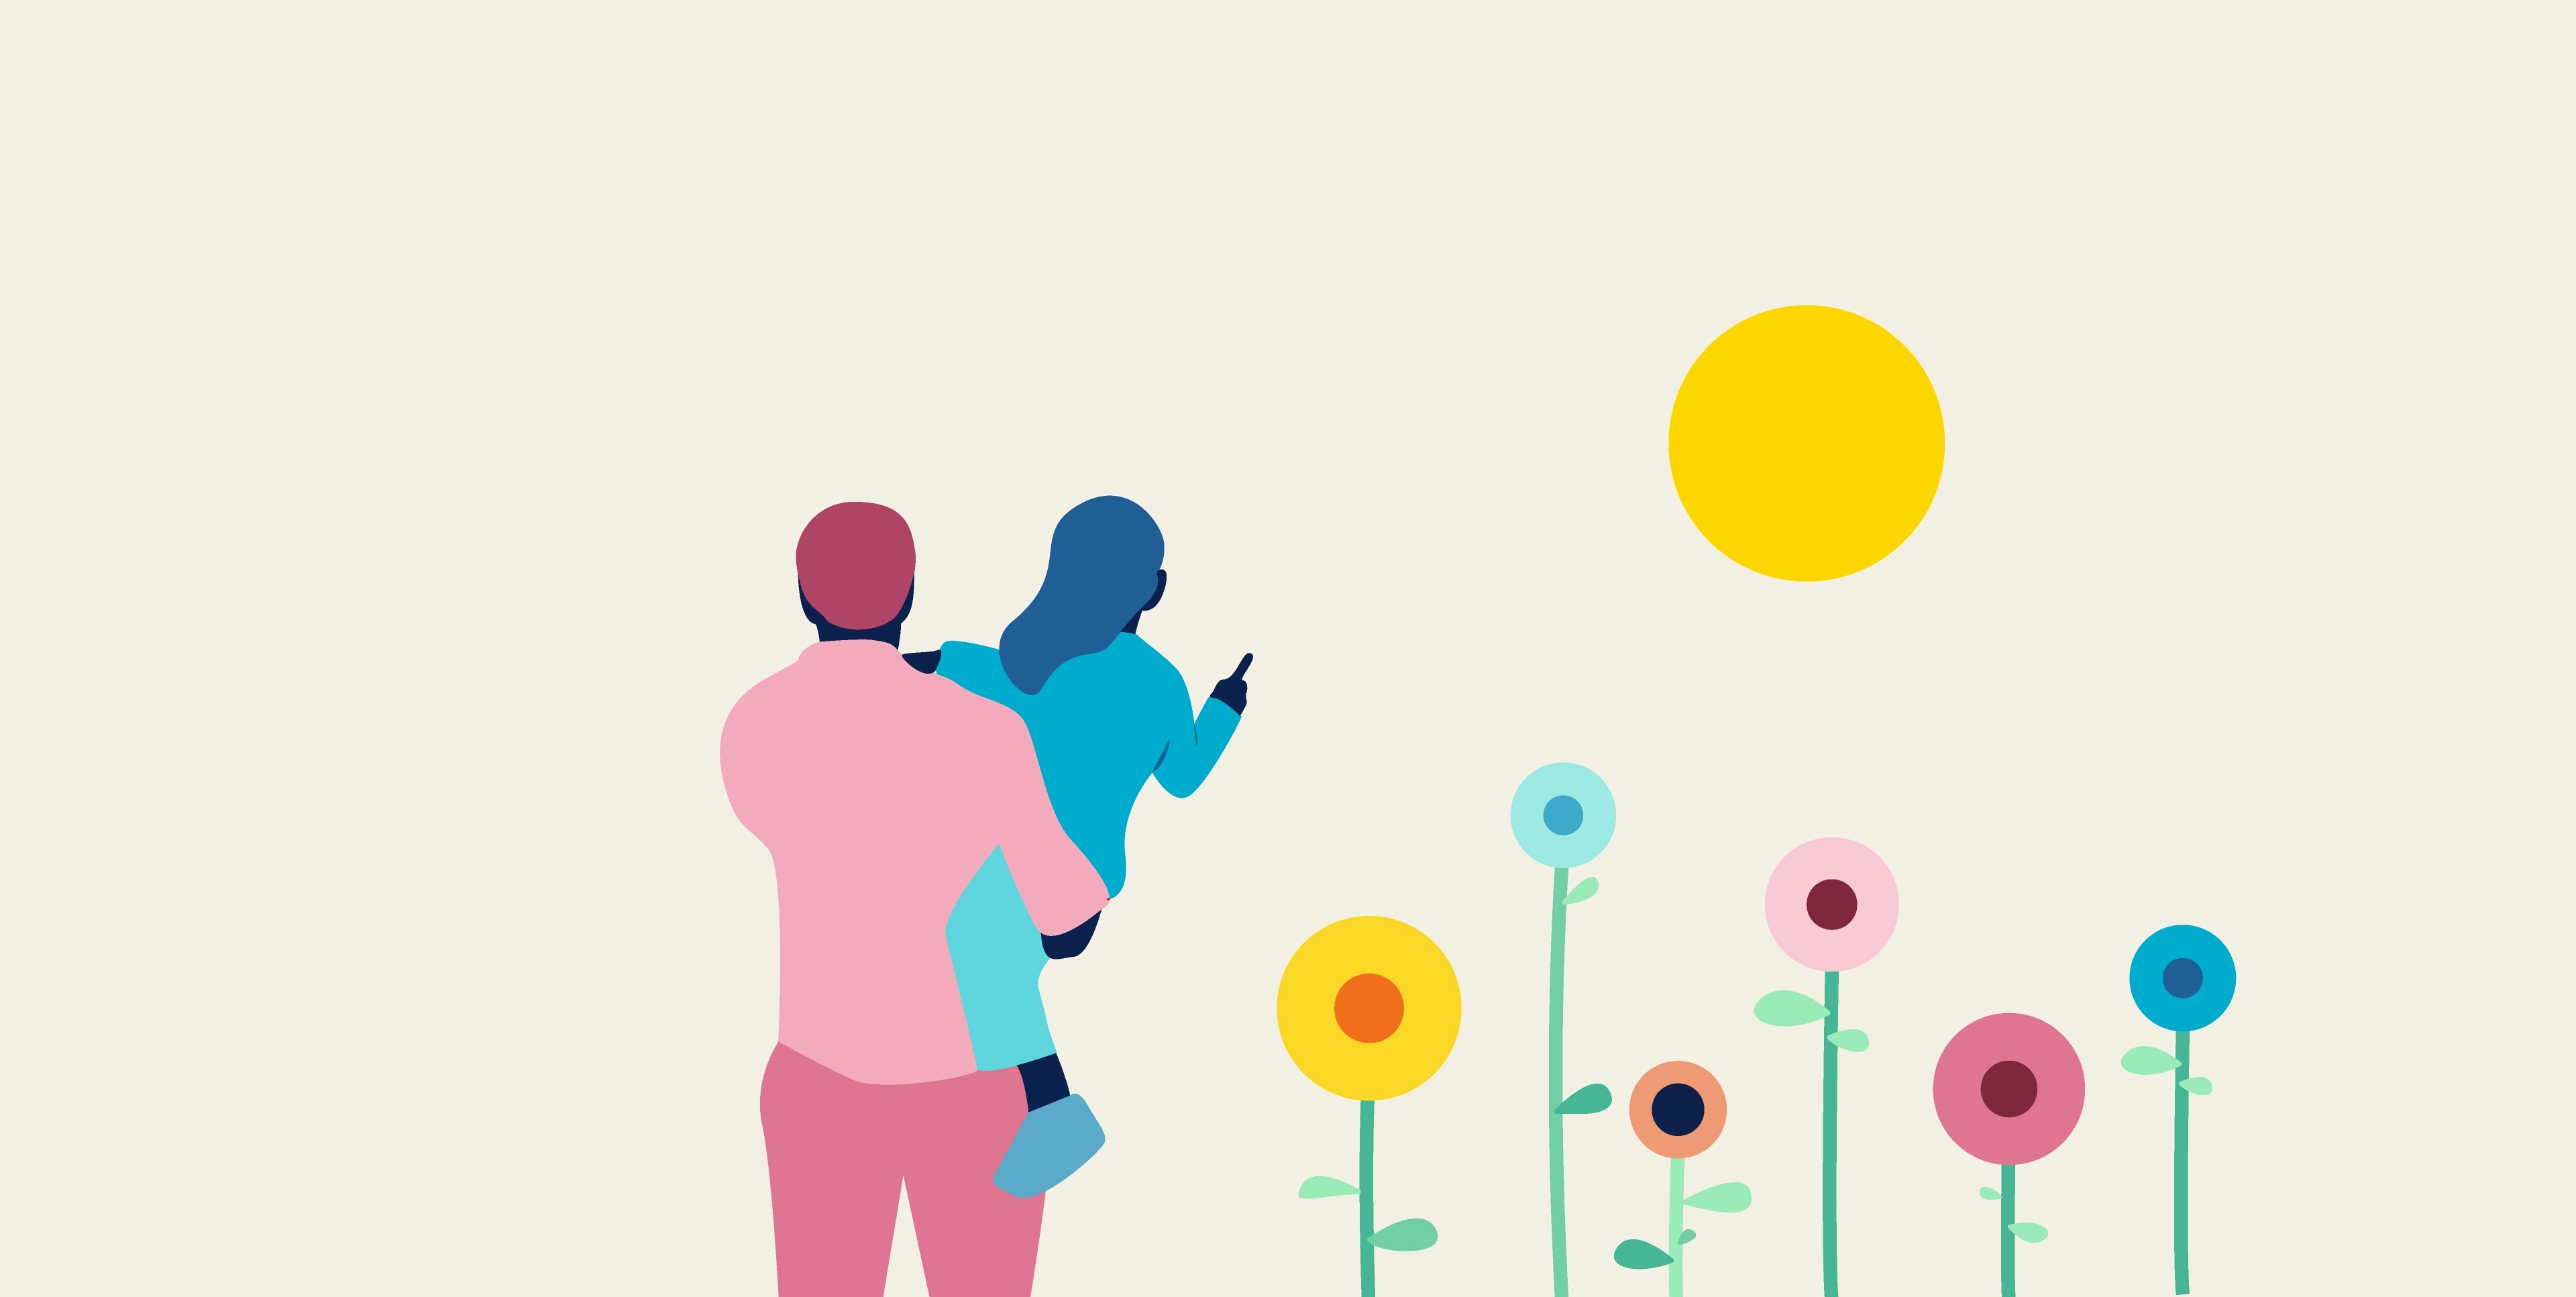 Parent holding child, pointing at the sun, surrounded by flowers. Illustration.